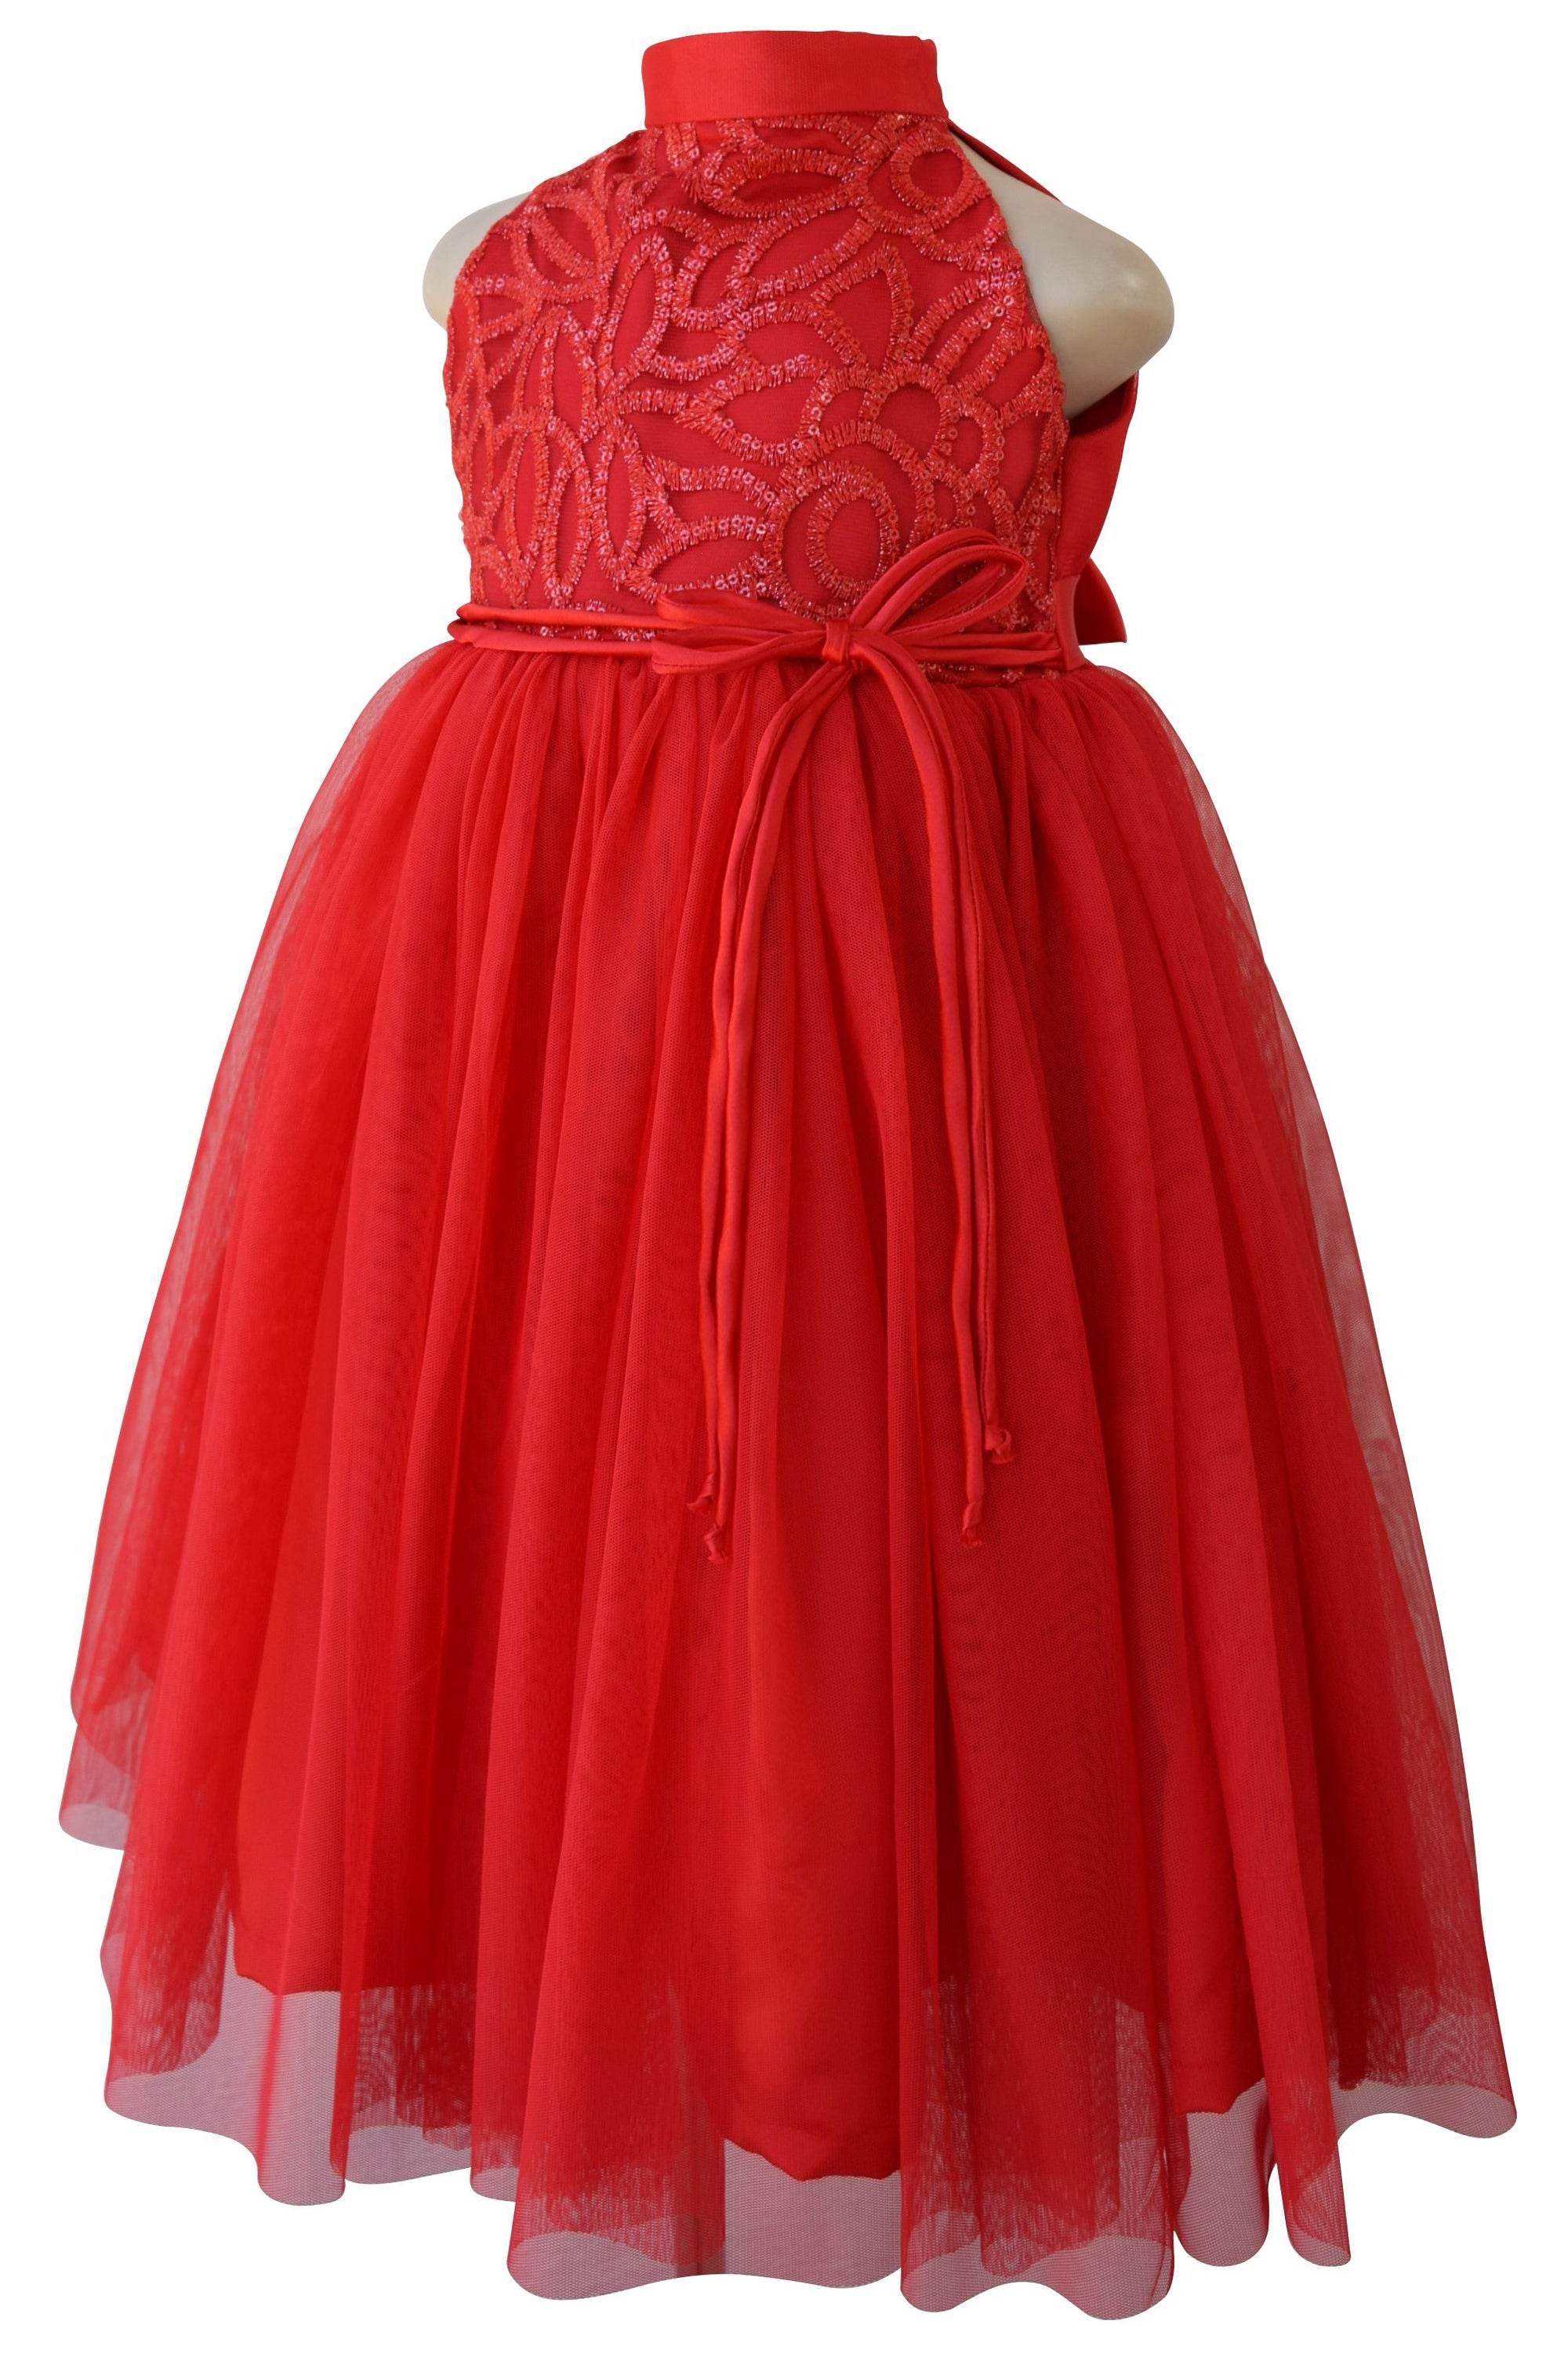 Kids Dream 560 Red Embroidered Lace V-Back and Bow Girl Dress - Pink  Princess